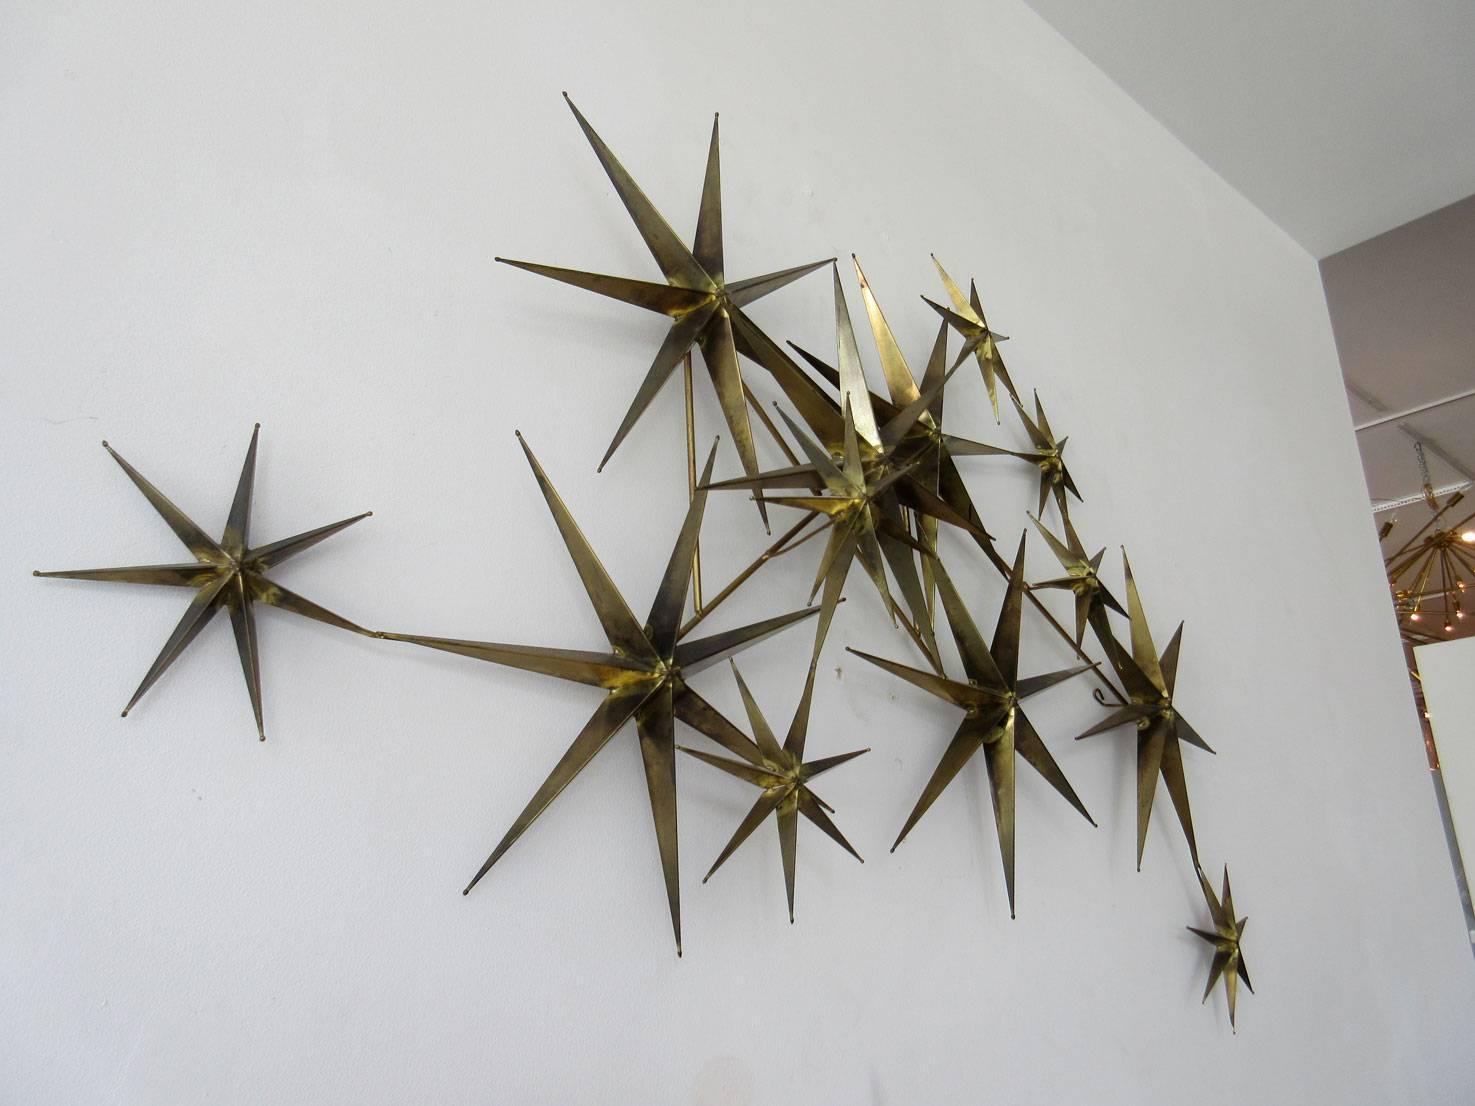 Unusual signed C. Jere wall sculpture, a series of dimensional starbursts. It is signed C. Jere 1981.